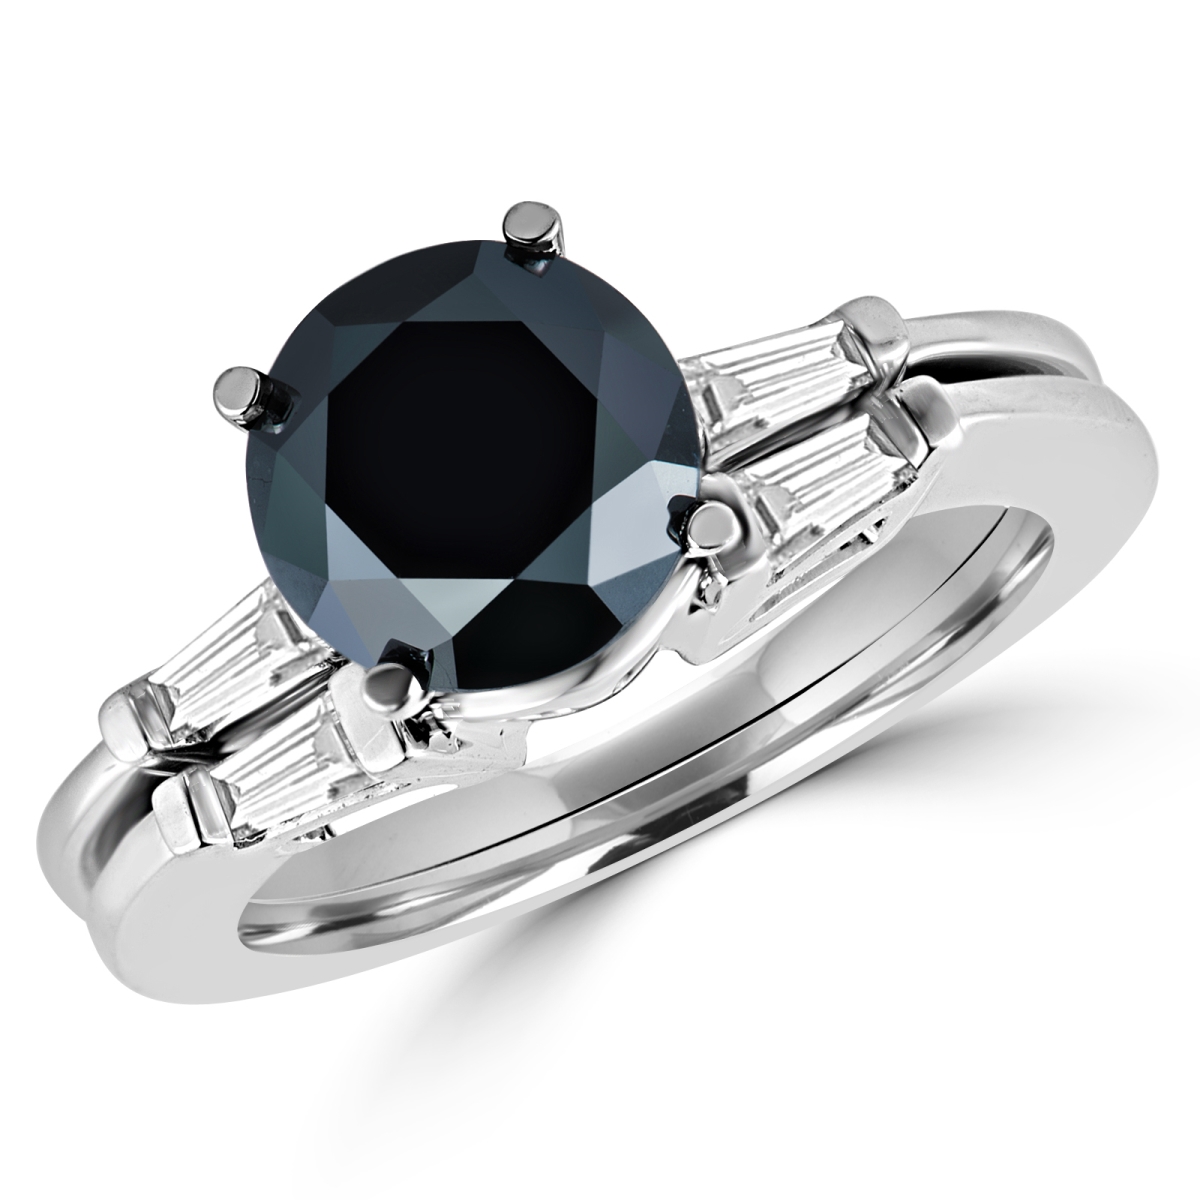 MD170354-P 2.1 CTW Round Black Diamond Solitaire with Accents Engagement Ring & Wedding Band Set in 14K White Gold -  Majesty Diamonds